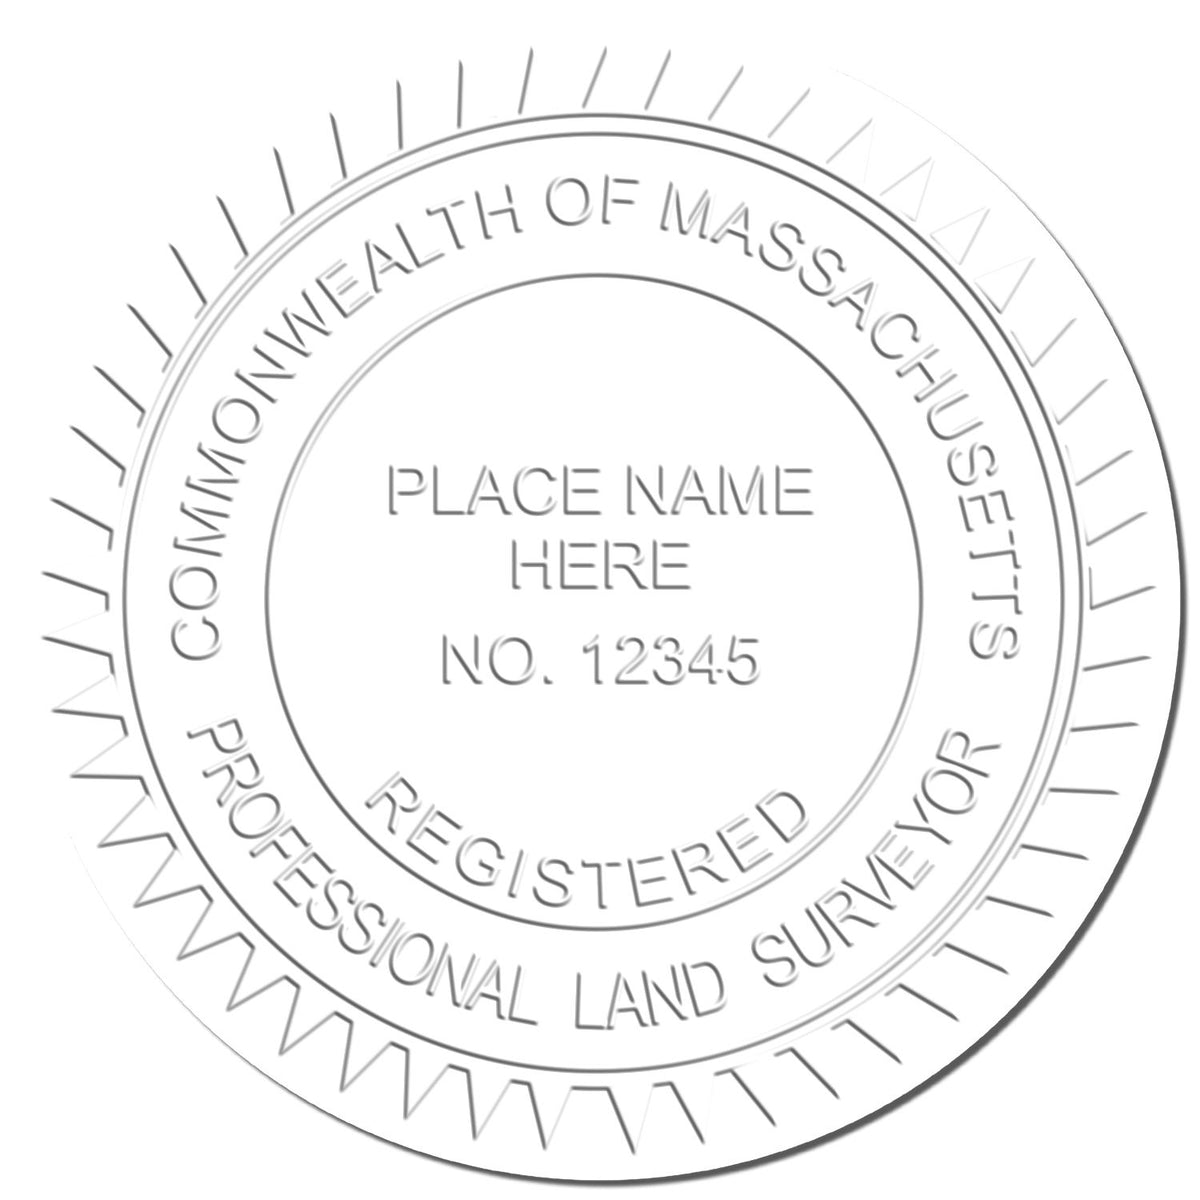 This paper is stamped with a sample imprint of the Heavy Duty Cast Iron Massachusetts Land Surveyor Seal Embosser, signifying its quality and reliability.